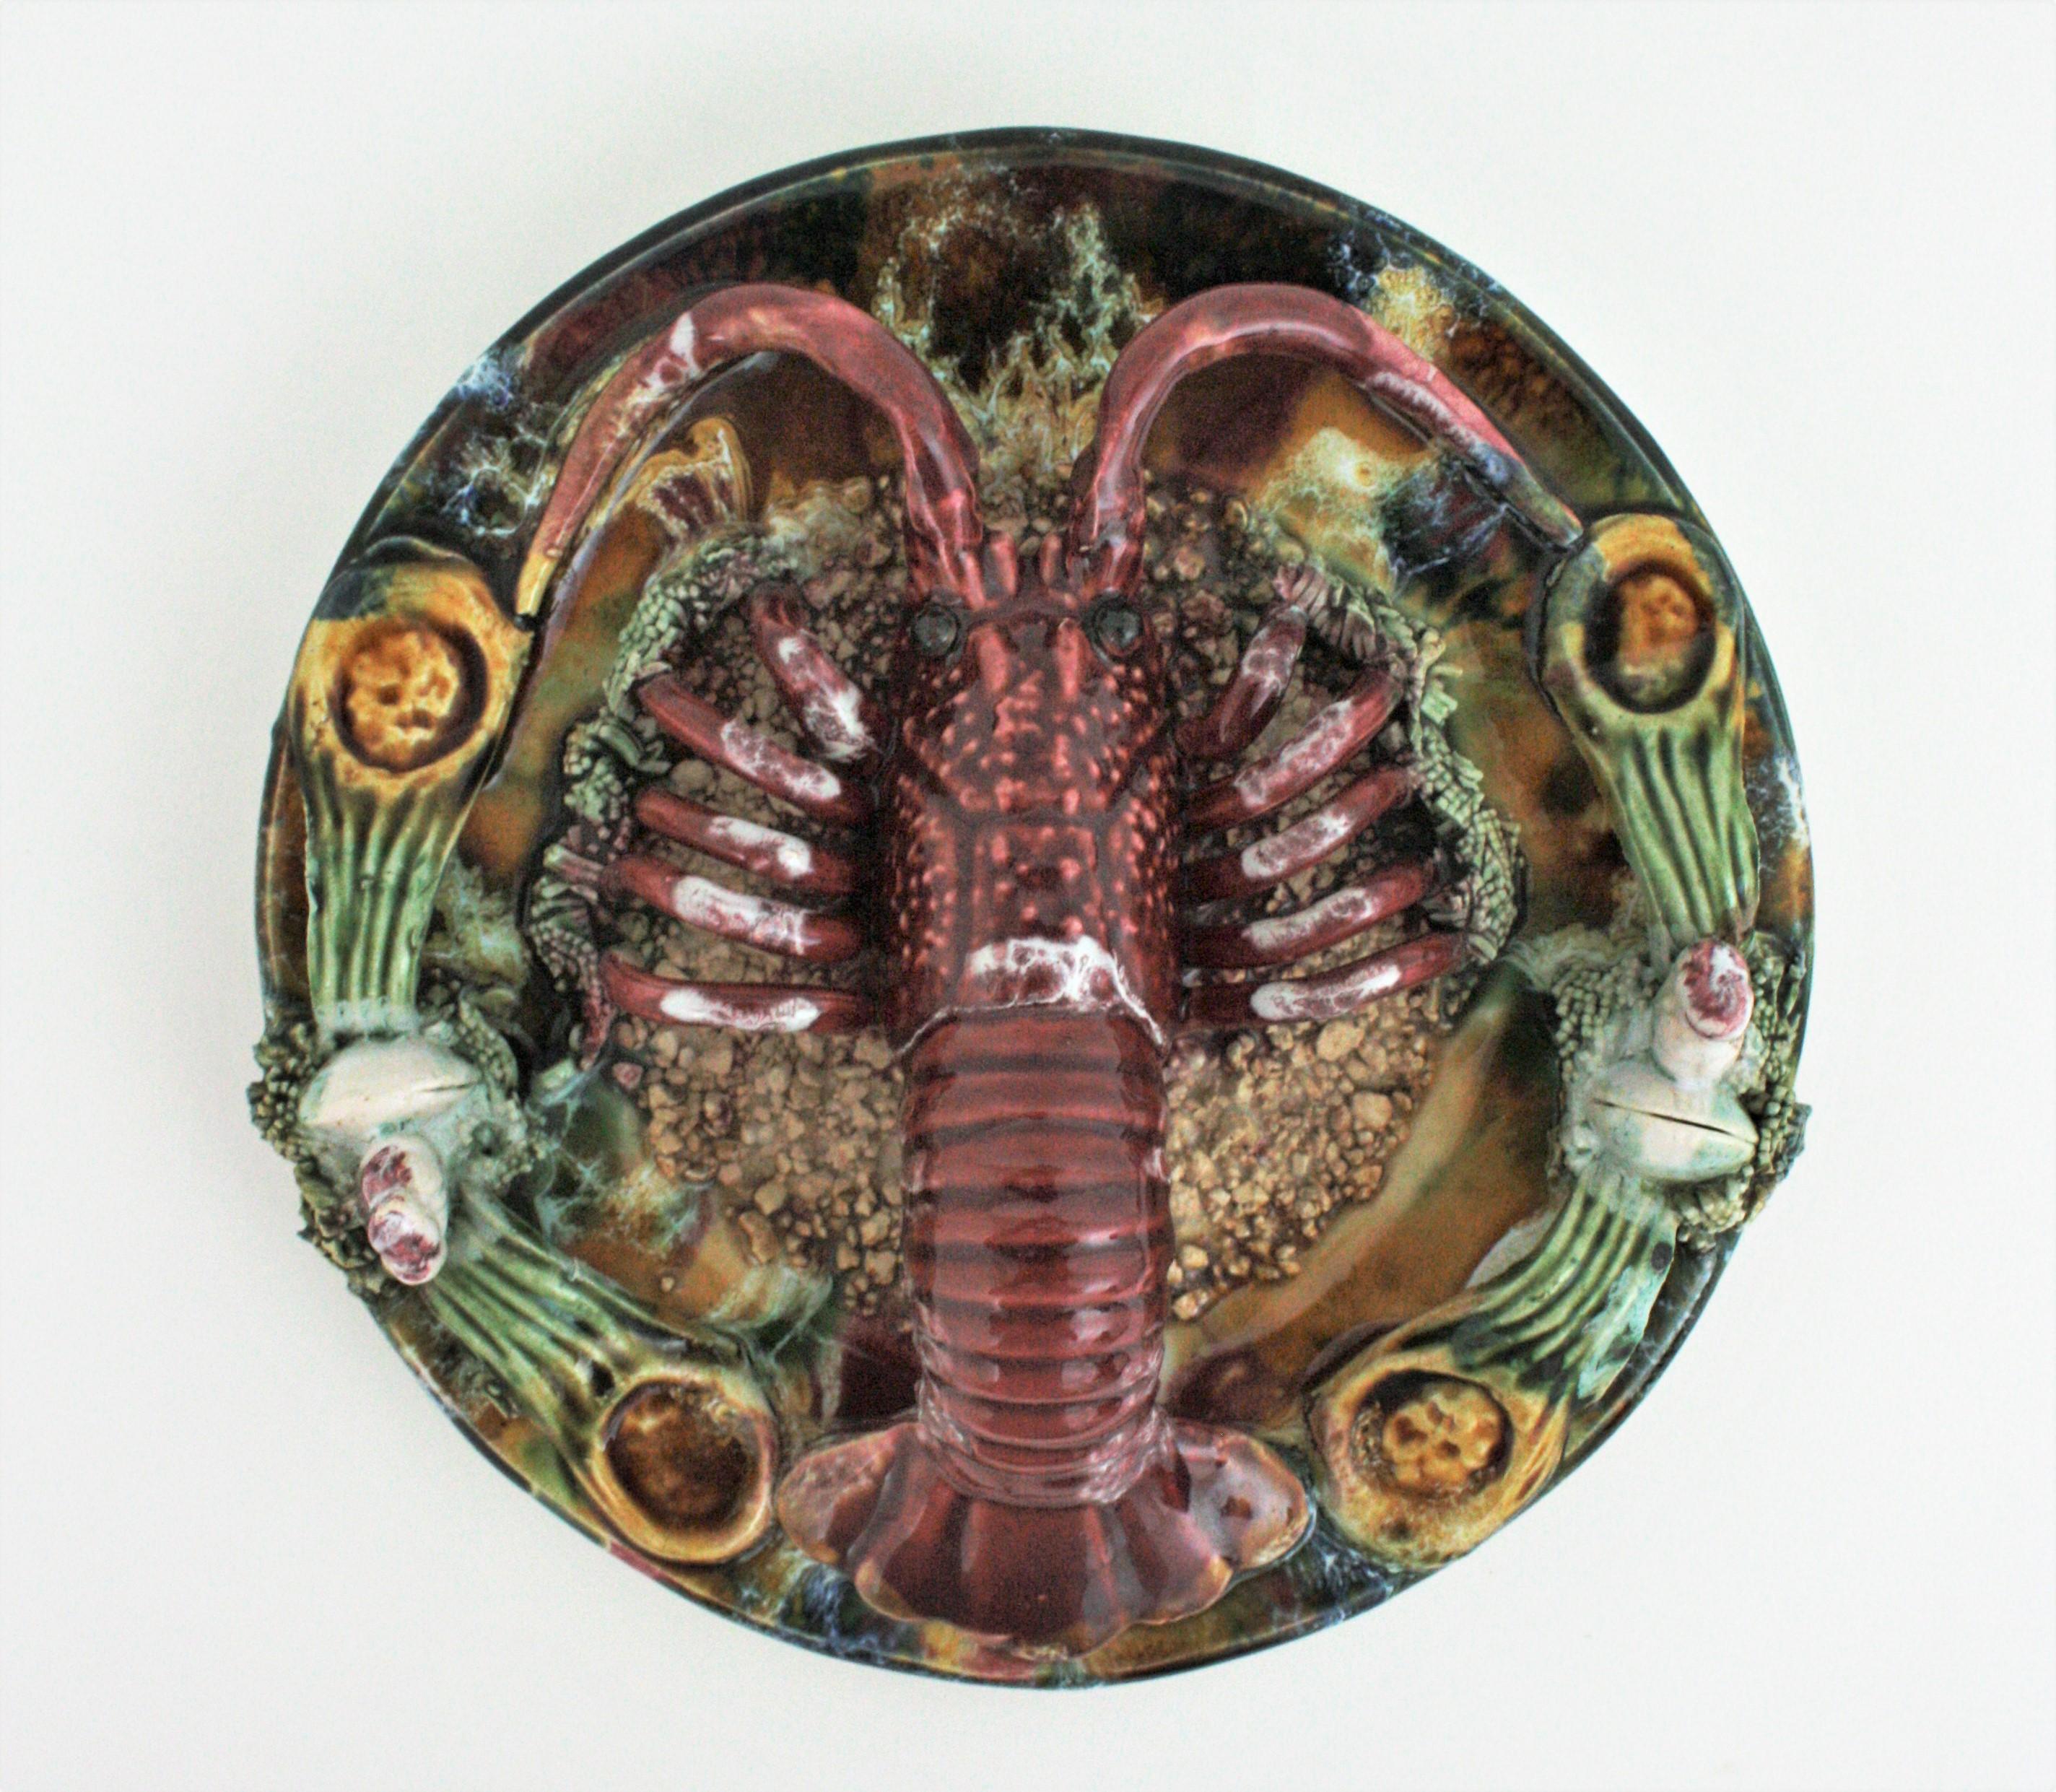 Trompe L'Oeil wall decoration / decorative wall plates, majolica, ceramic, Portugal, 1940s-1950s
A colorful wall composition comprised by three Majolica glazed ceramic wall plates with seafood trompe l'oeil decorations. 
Such a realistic